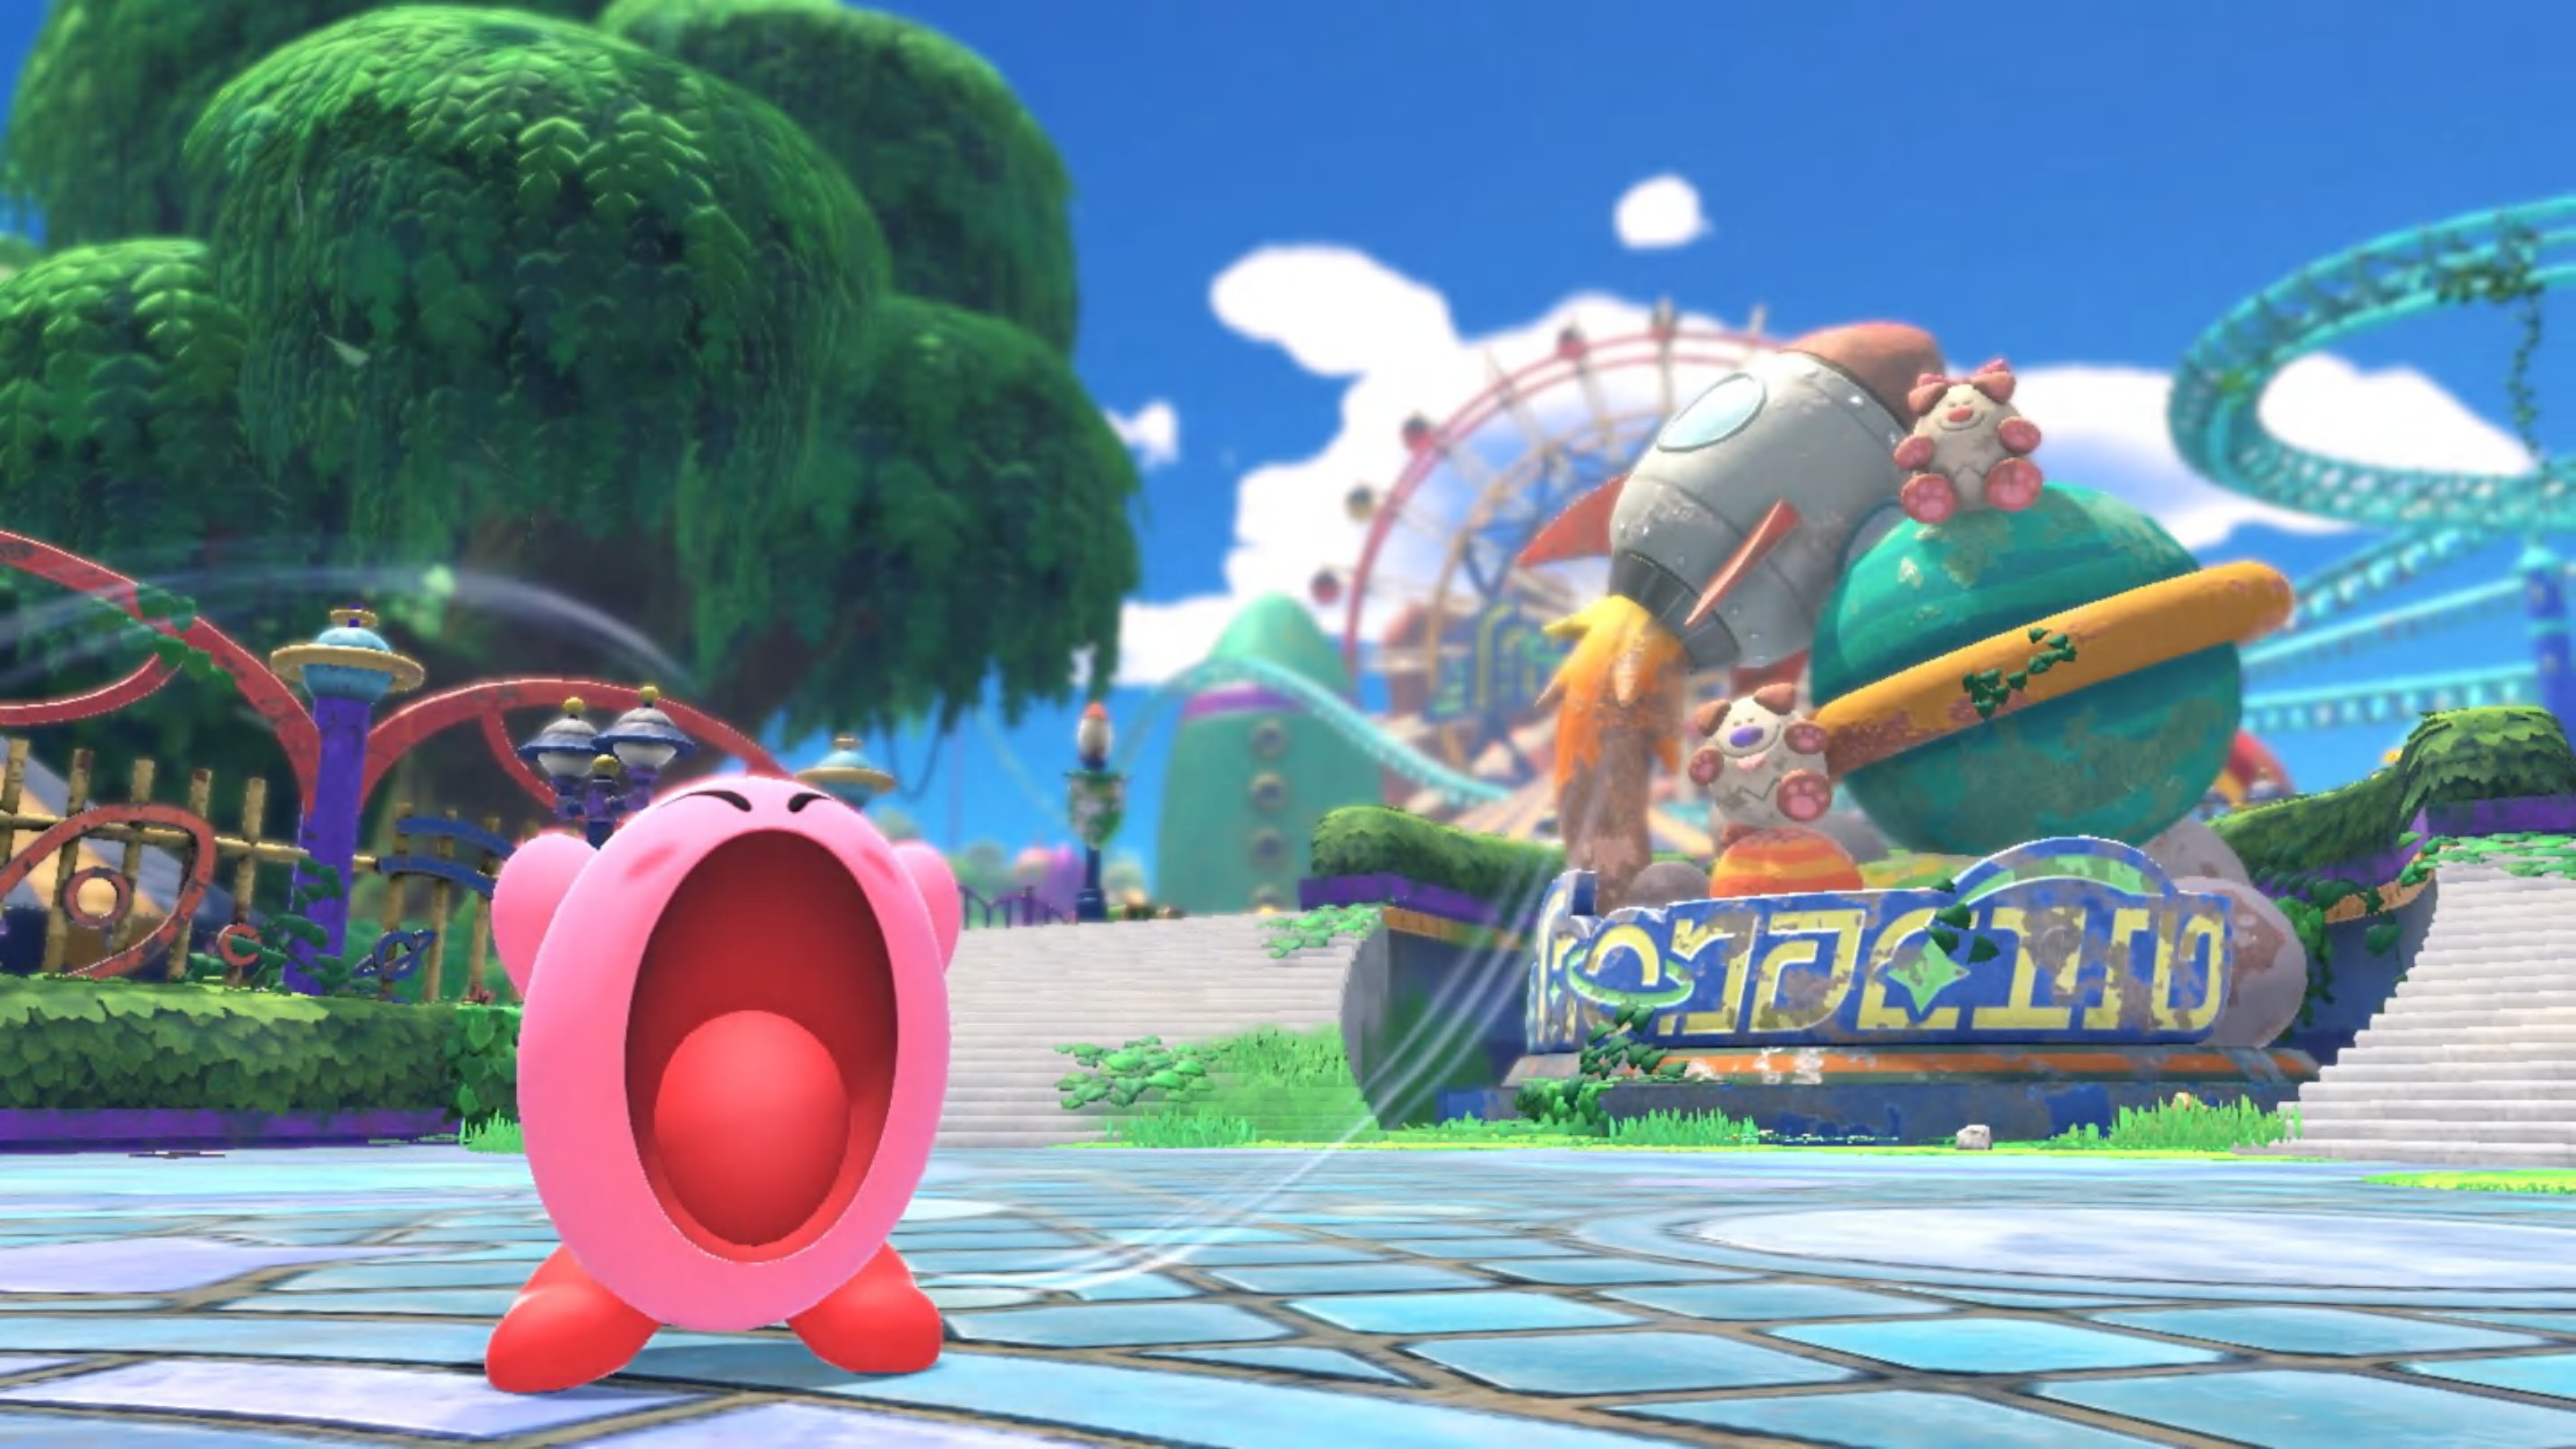 Kirby and The Forgotten Land Is The Best Selling Kirby Game Ever - Gameranx